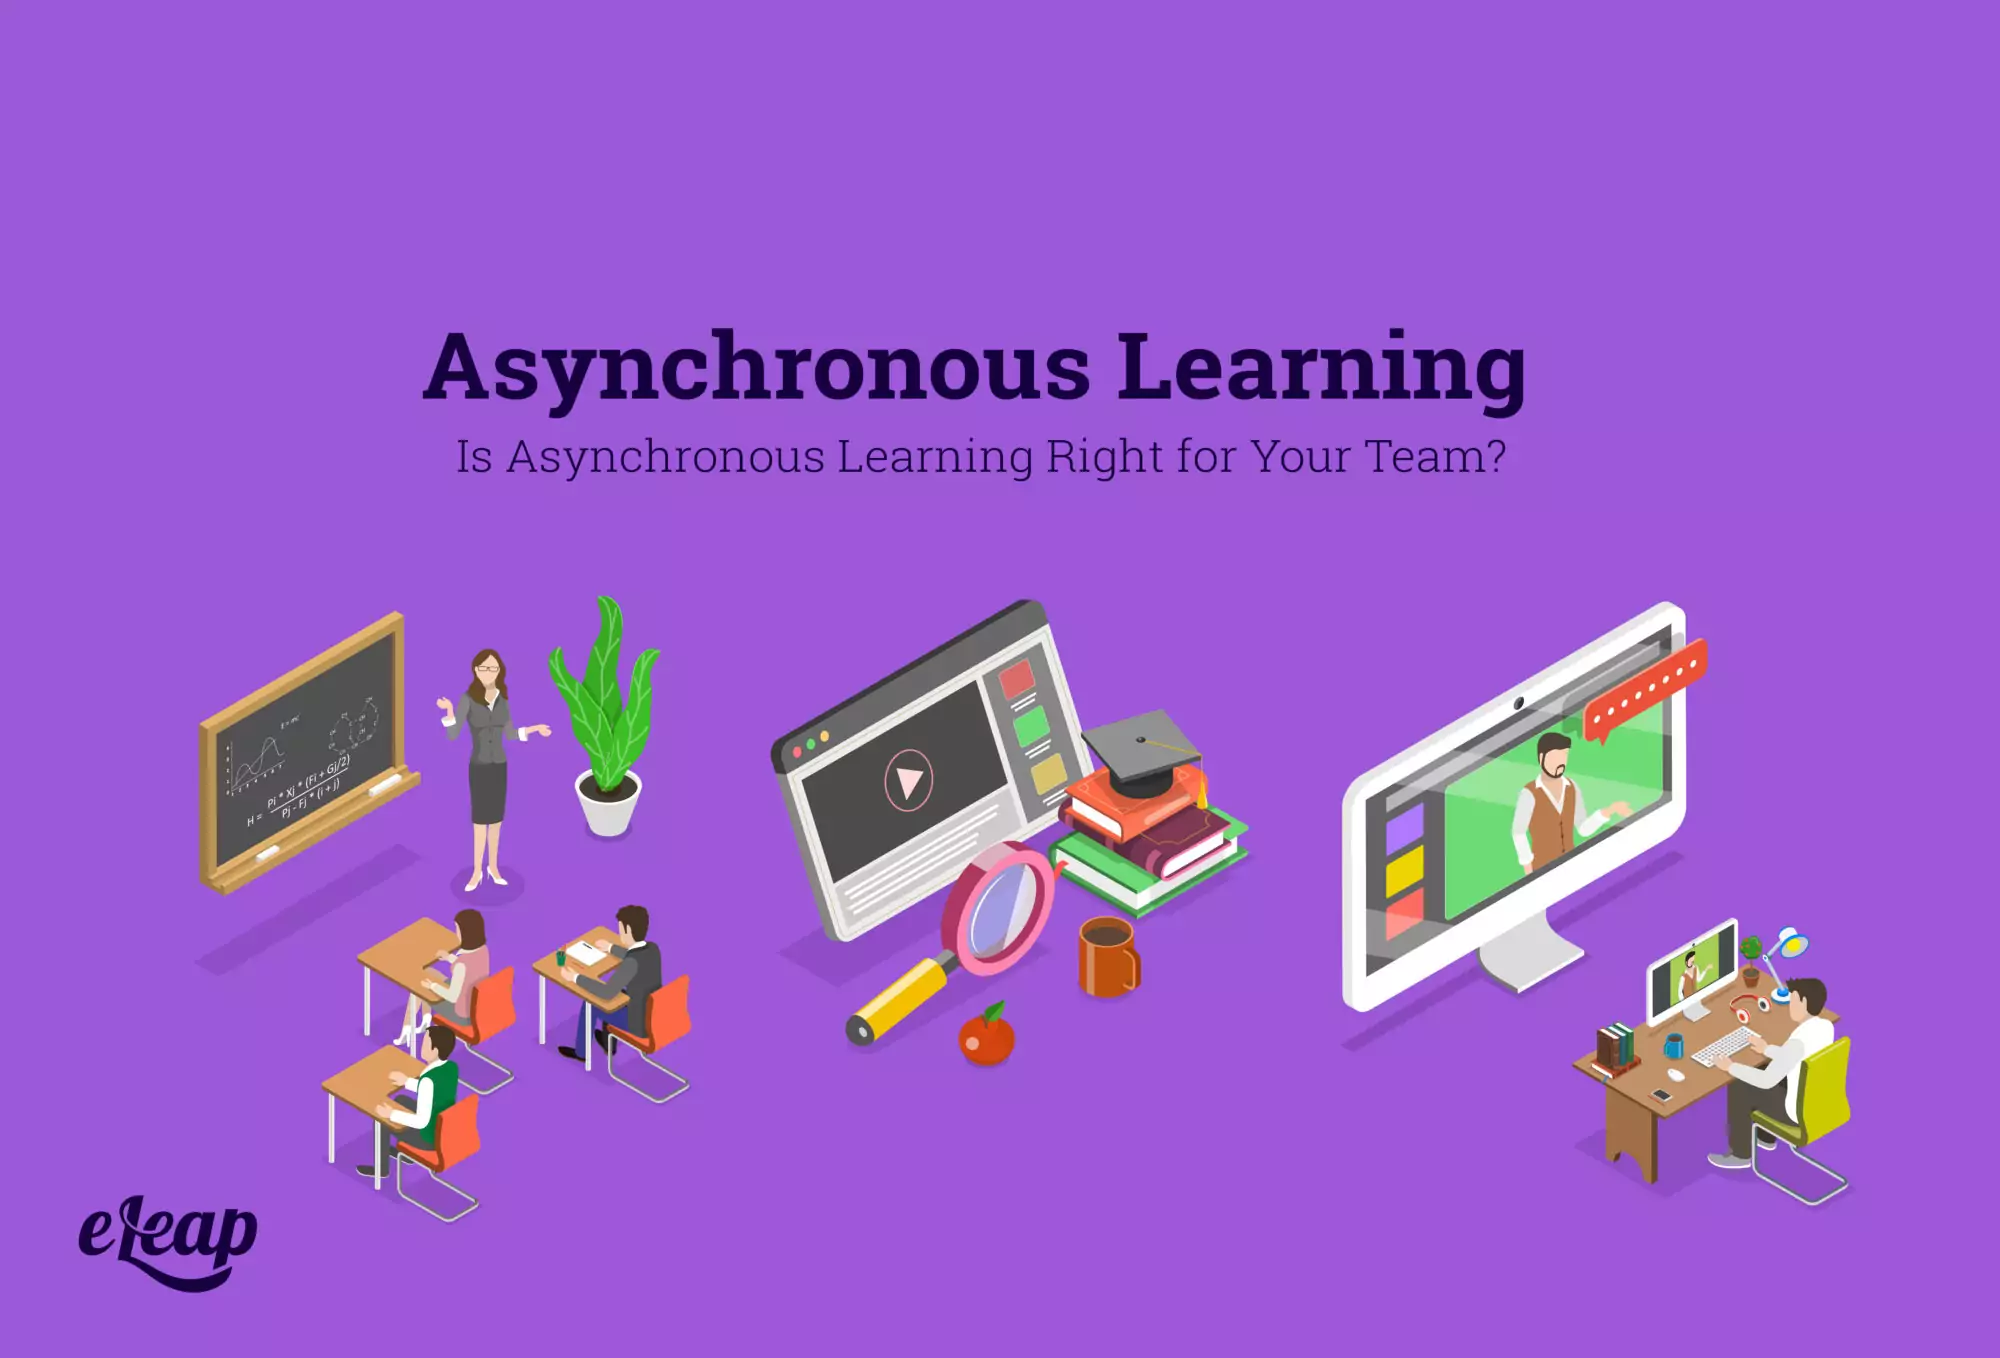 Is Asynchronous Learning Right for Your Team?